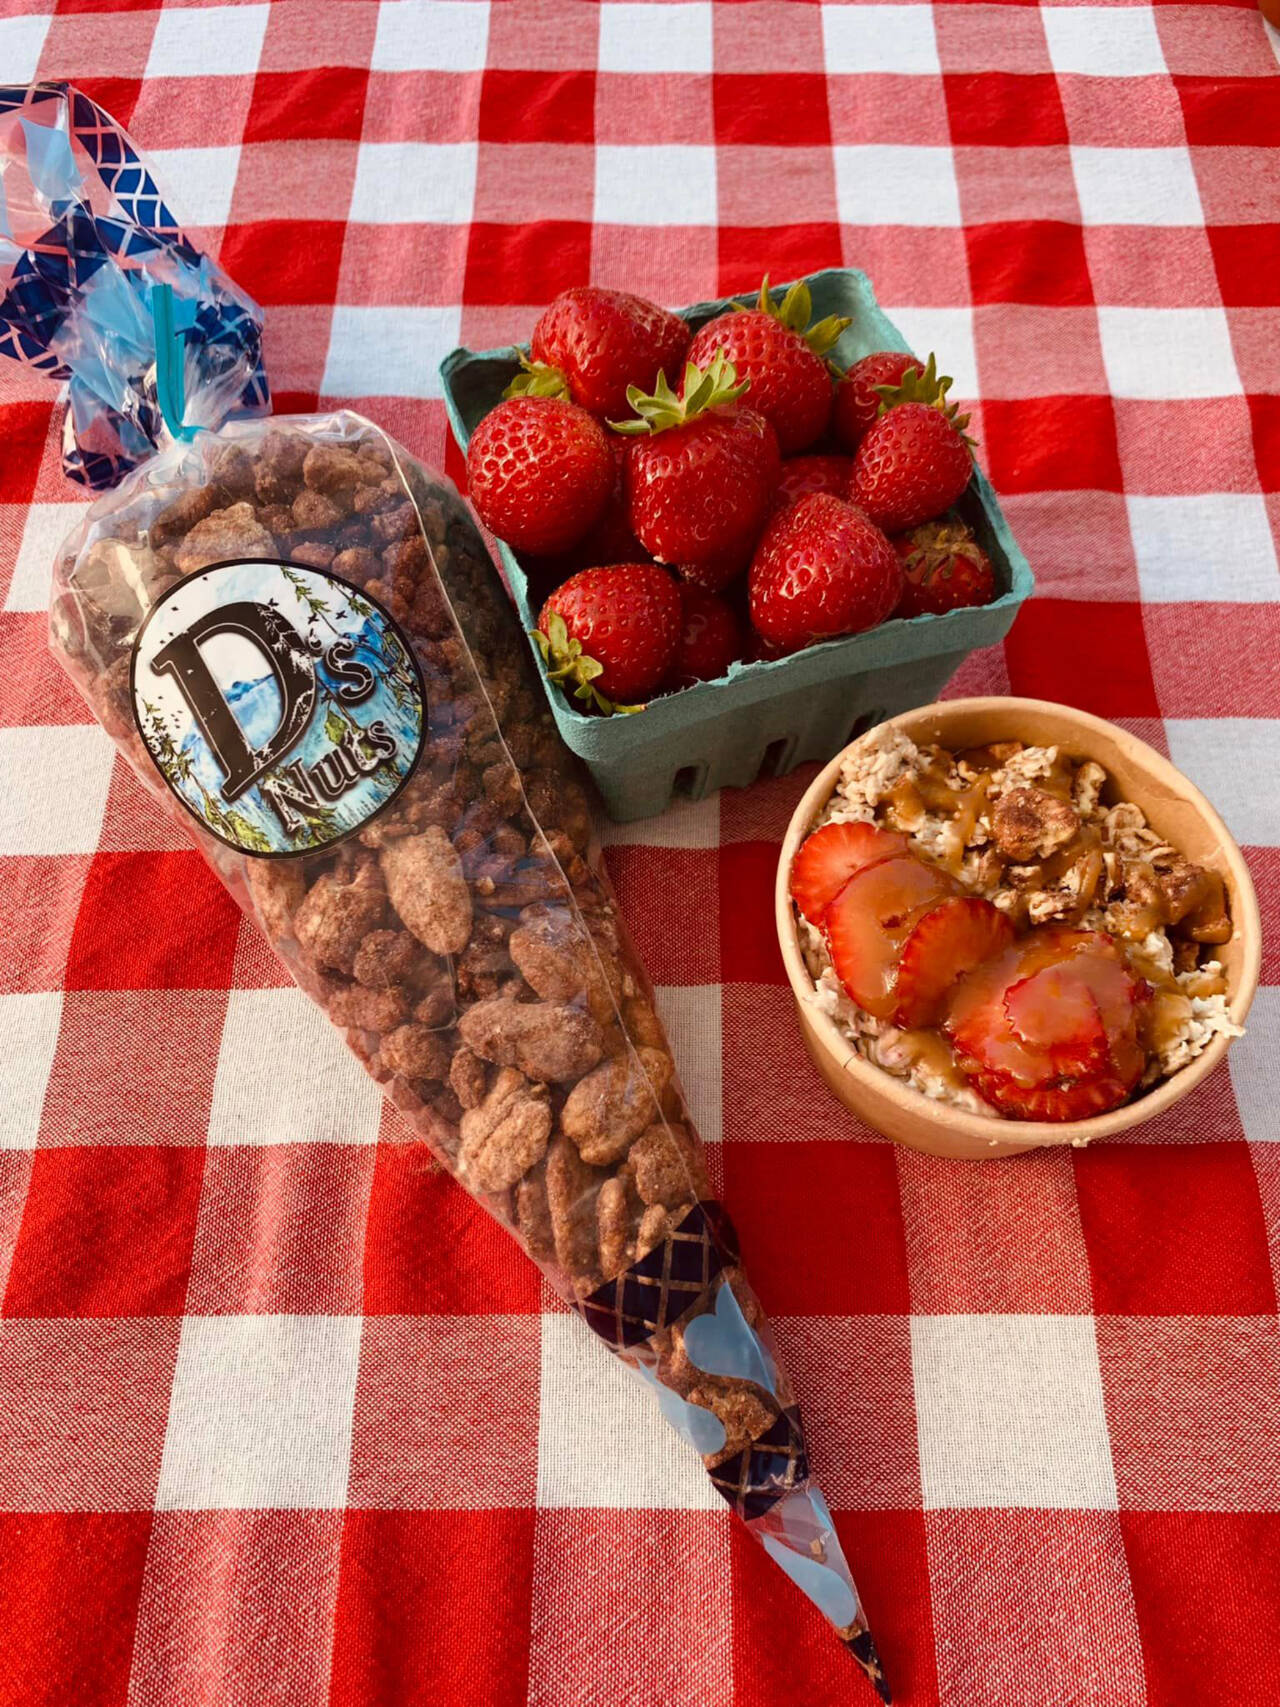 Photo courtesy of Shultz Smokehouse / At Shultz Smokehouse, check out overnight oats, with housemade hickory salted caramel, market berries and cinnamon roasted pecans that are roasted on-site from fellow market vendor D’s Nuts.